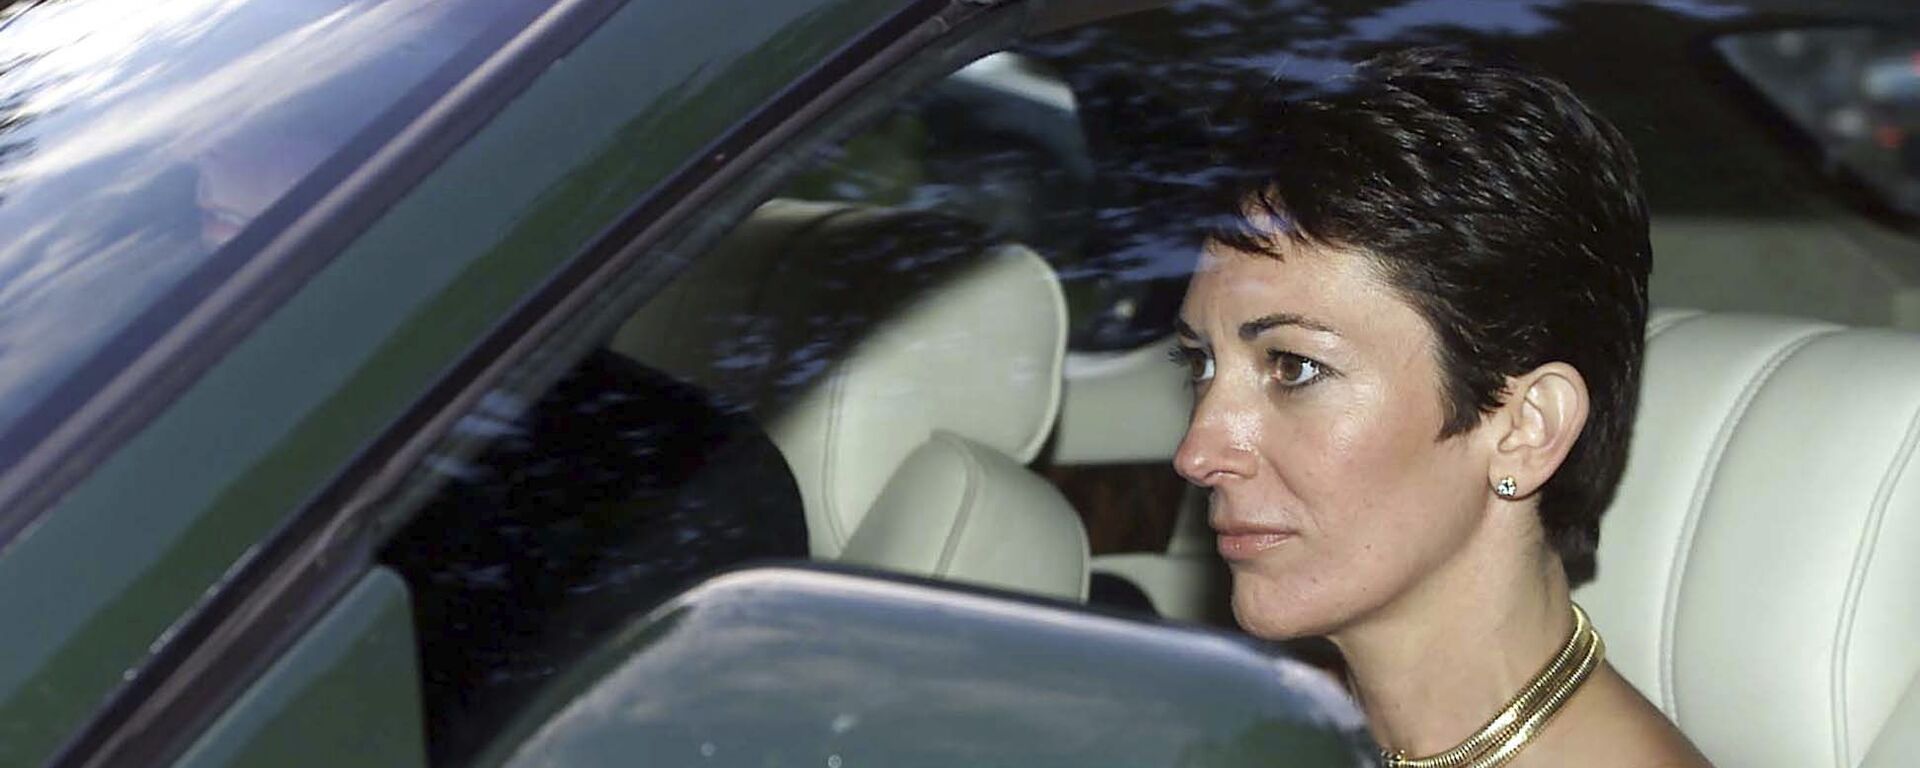 FILE - In this Sept. 2, 2000 file photo, British socialite Ghislaine Maxwell, driven by Britain's Prince Andrew leaves the wedding of a former girlfriend of the prince, Aurelia Cecil, at the Parish Church of St Michael in Compton Chamberlayne near Salisbury, England. The FBI said Thursday July 2, 2020, Ghislaine Maxwell, who was accused by many women of helping procure underage sex partners for Jeffrey Epstein, has been arrested in New Hampshire. - Sputnik International, 1920, 07.12.2021